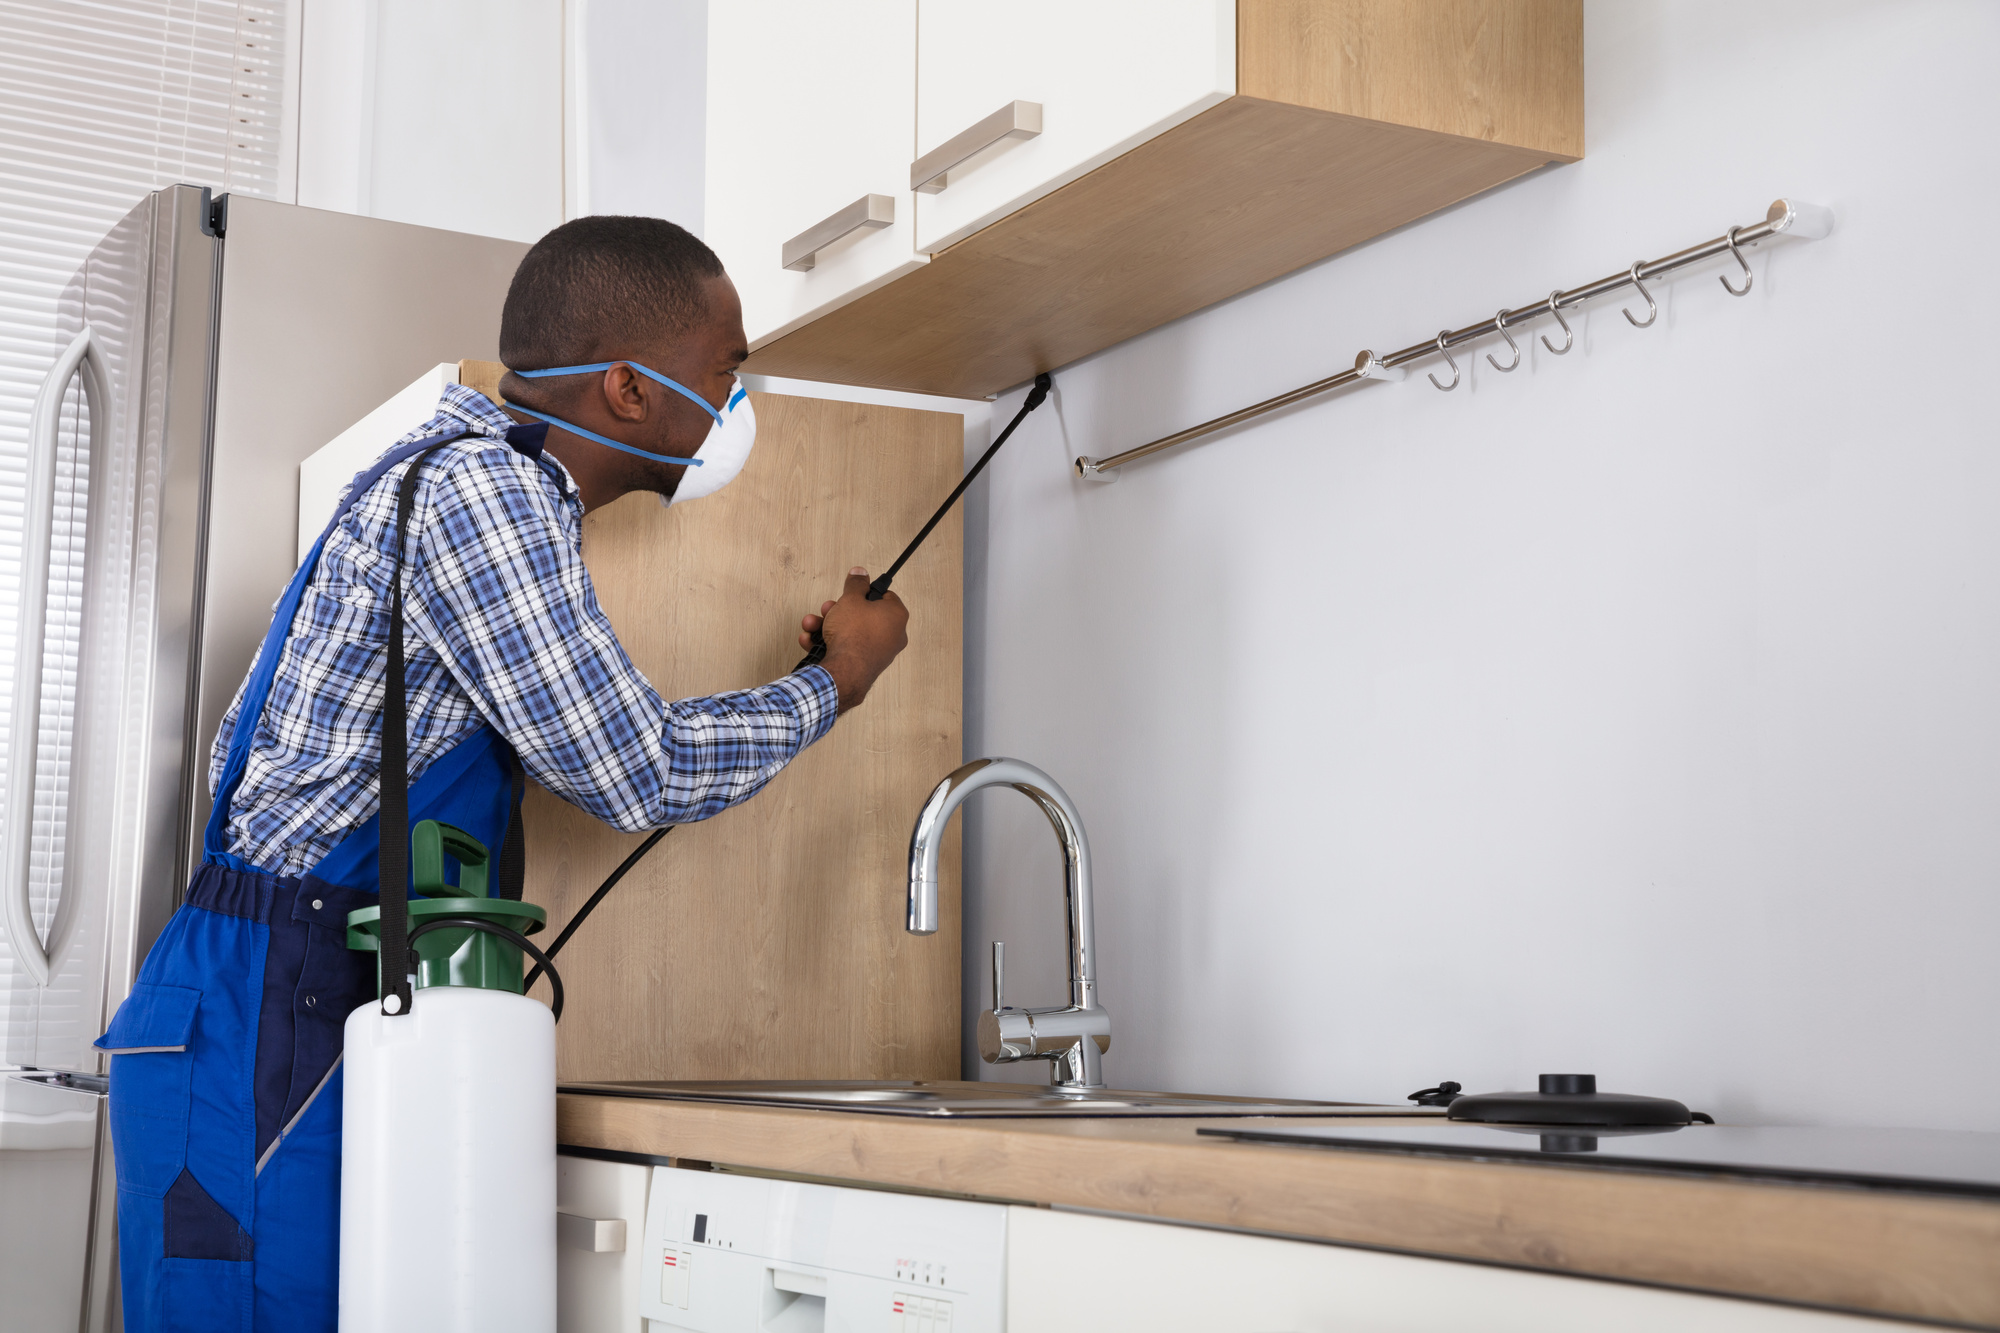 Pest Management: Simple Ways to Keep Your Home Bug Free